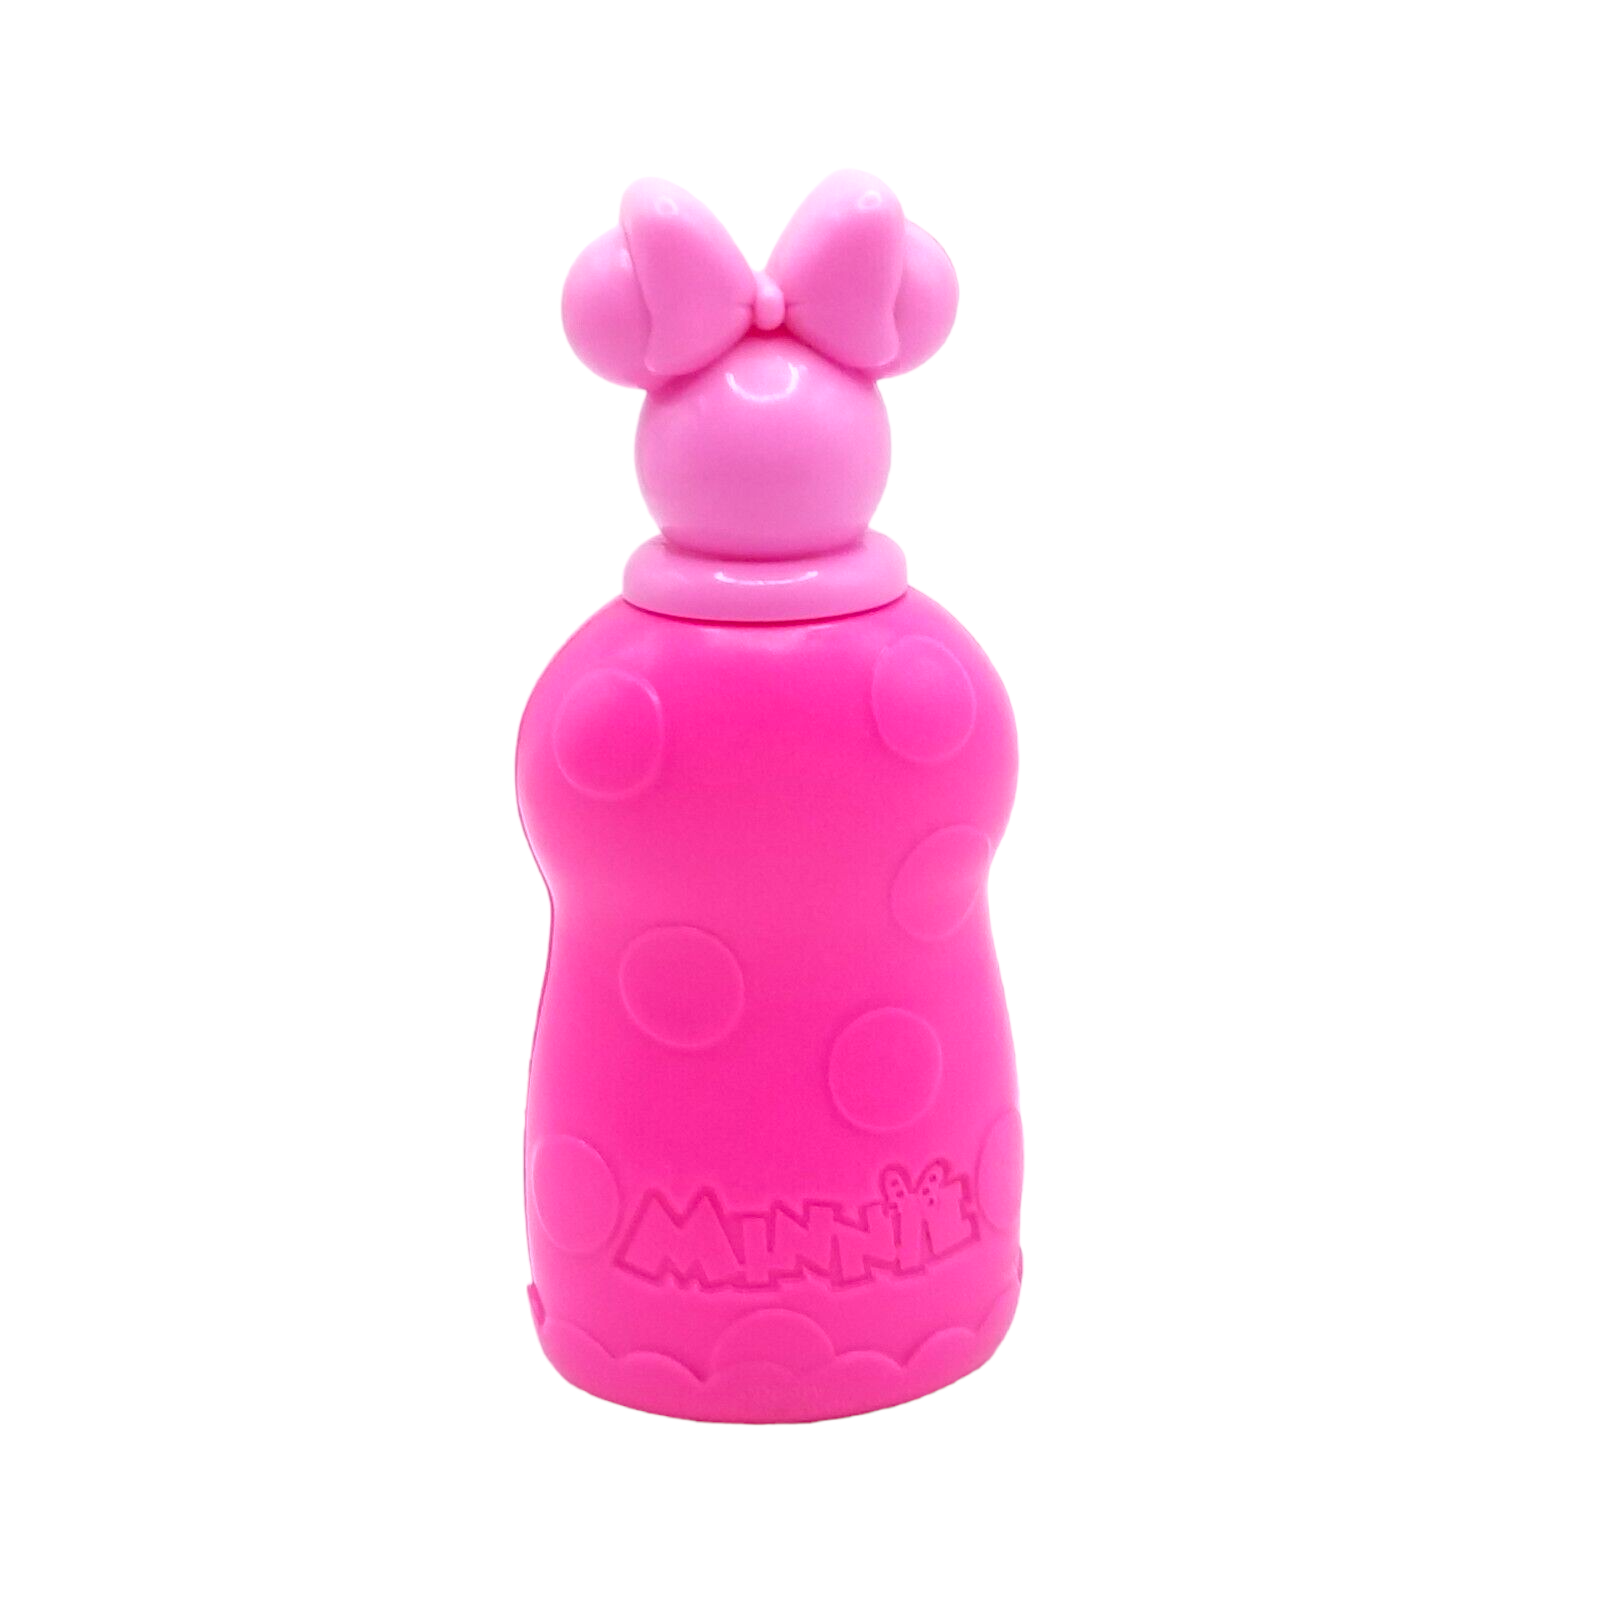 Primary image for Just Play Minnie Mouse SOAP BOTTLE Magic Sink Set Replacement Part Pink Disney